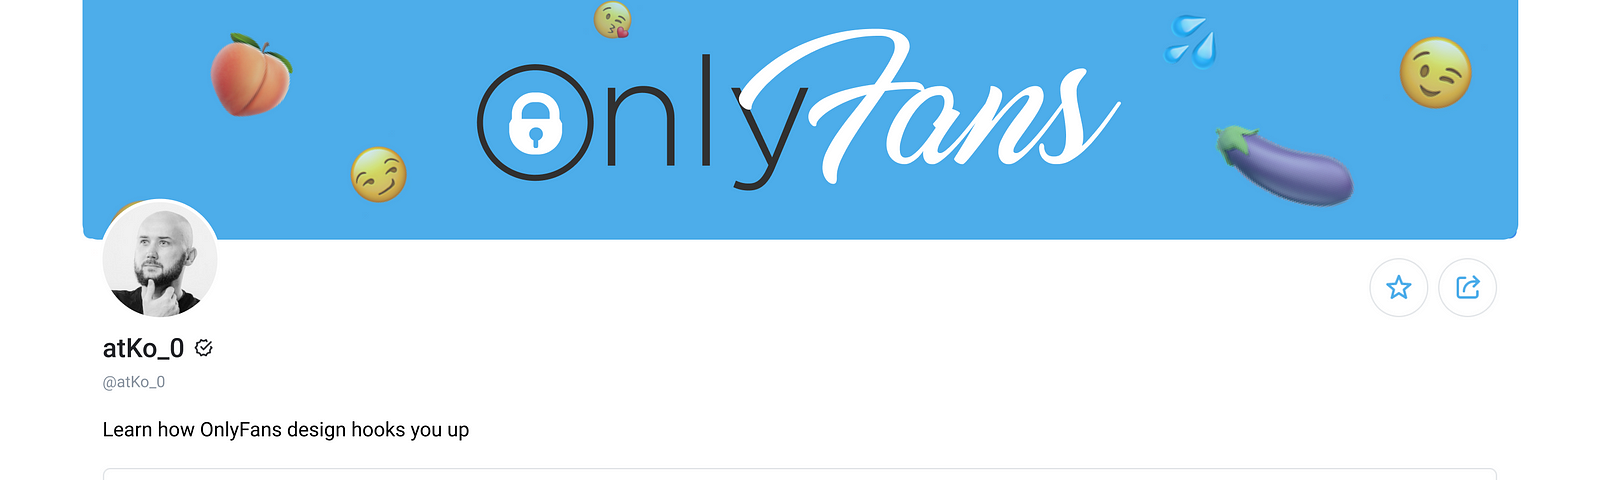 Anthony onlyfans nelson OnlyFans